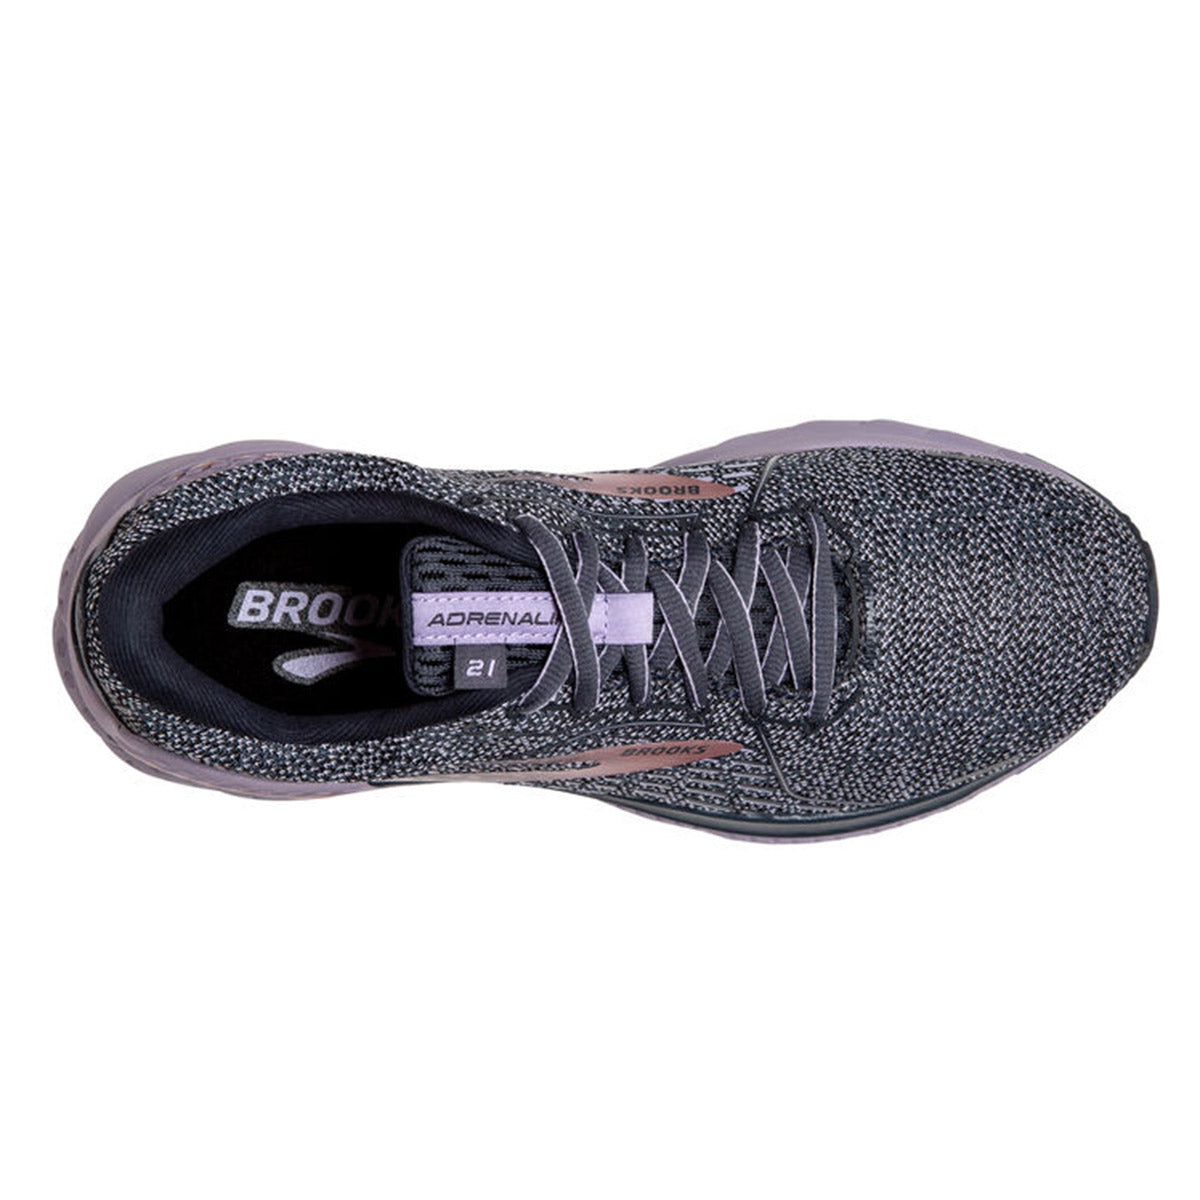 Top view of a single gray Brooks Adrenaline GTS 21 running shoe.